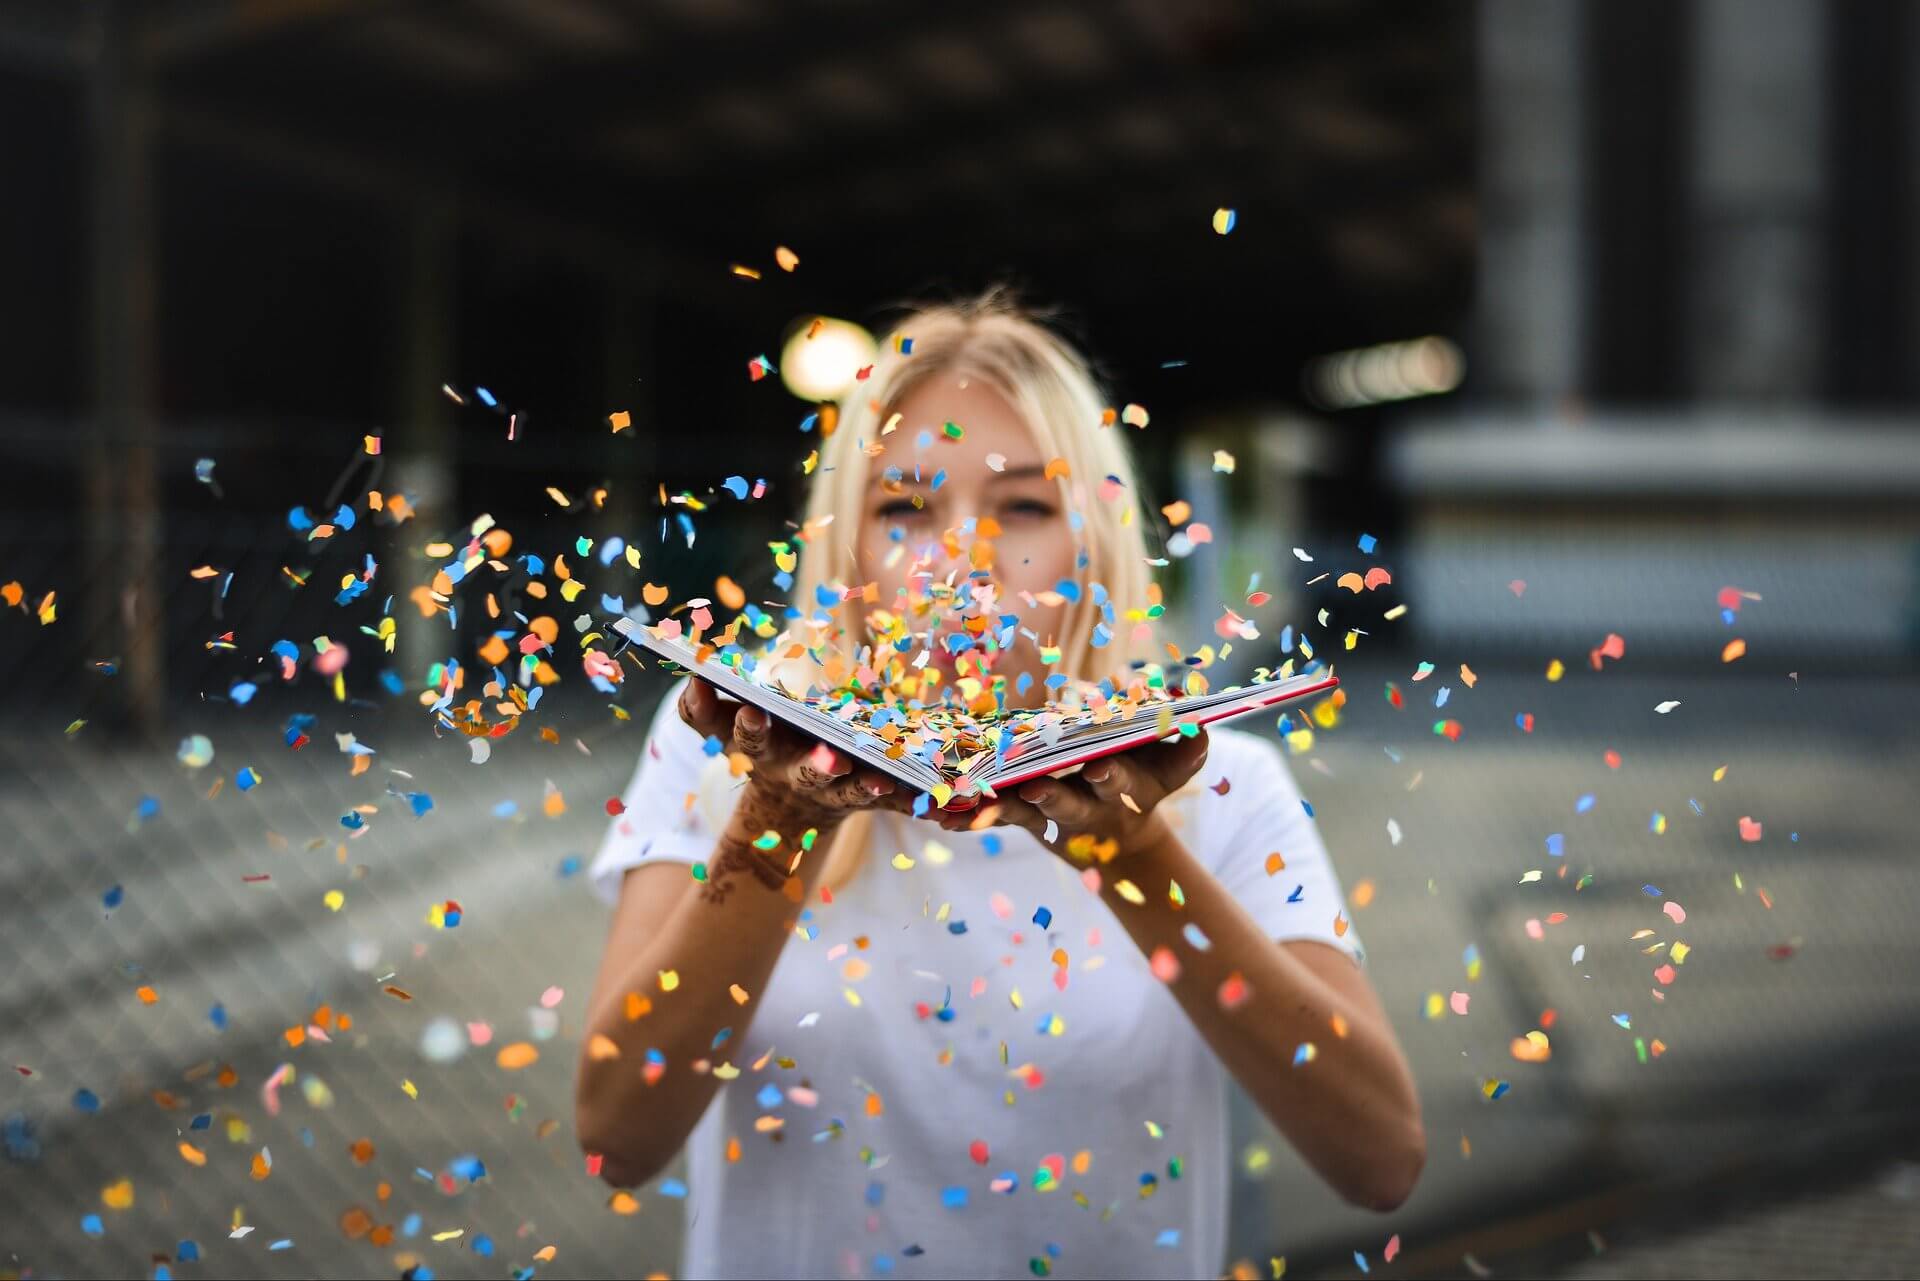 A woman blowing confetti out of a book